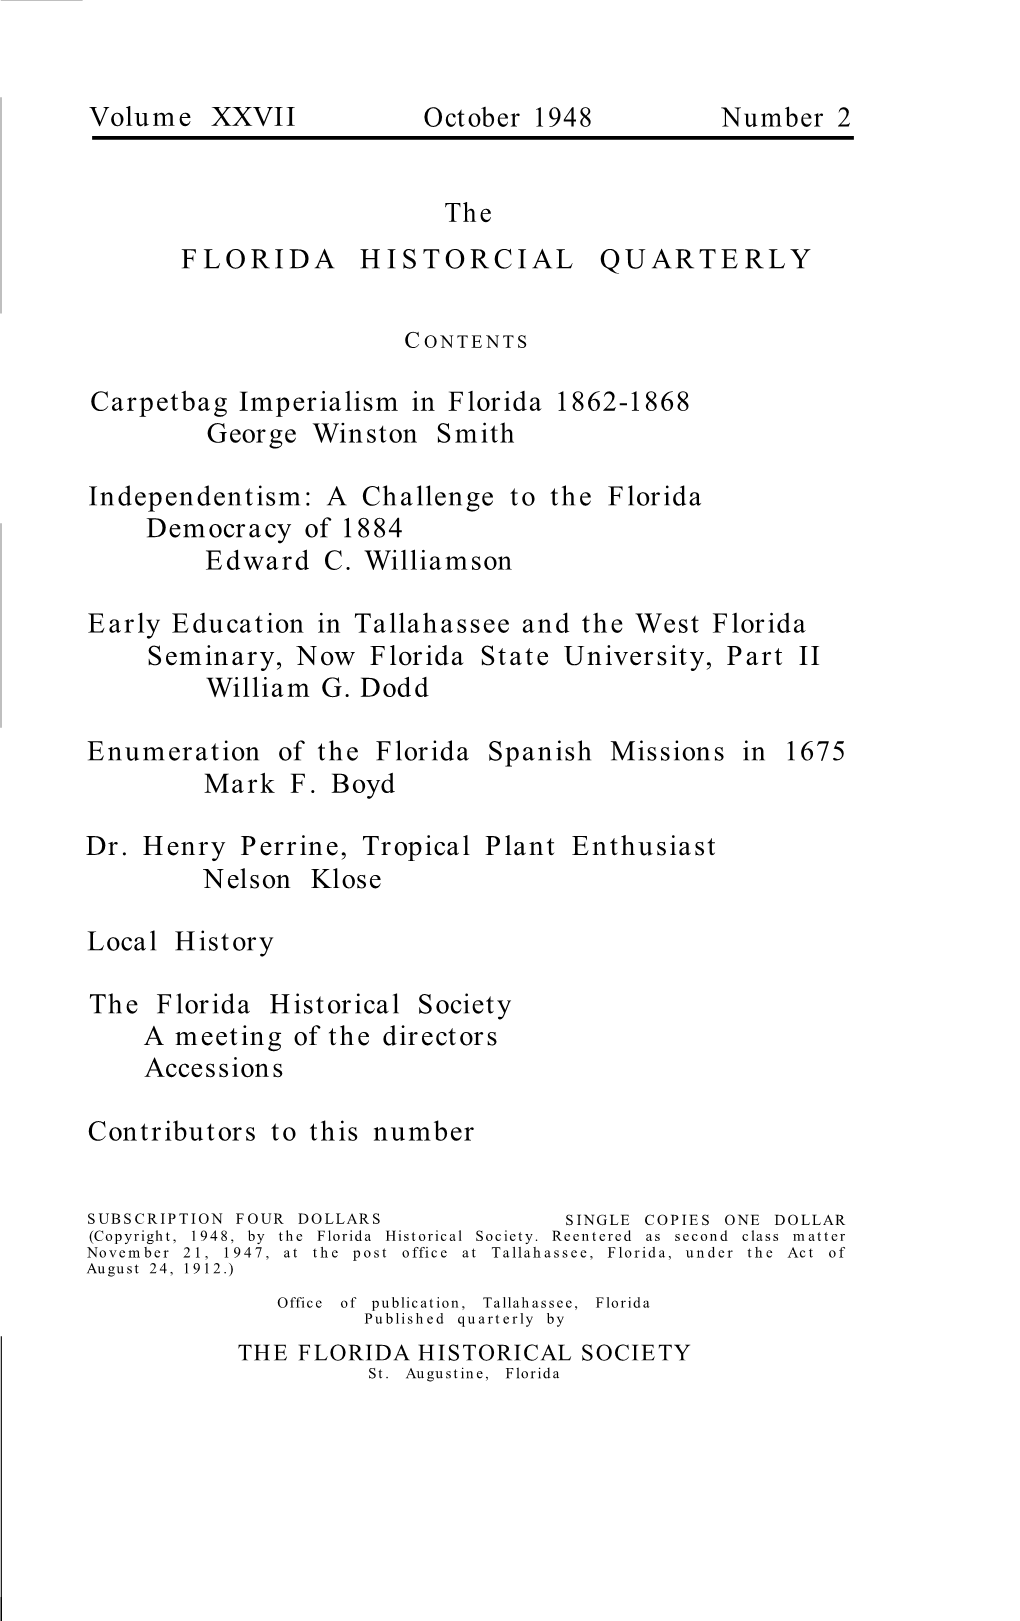 The Florida Historical Quarterly, XVIII (1939), P.84; Webster Merritt, “Physicians and Medicine in Early Jacksonville,” Ibid., XXIV (1946), Pp.266-269